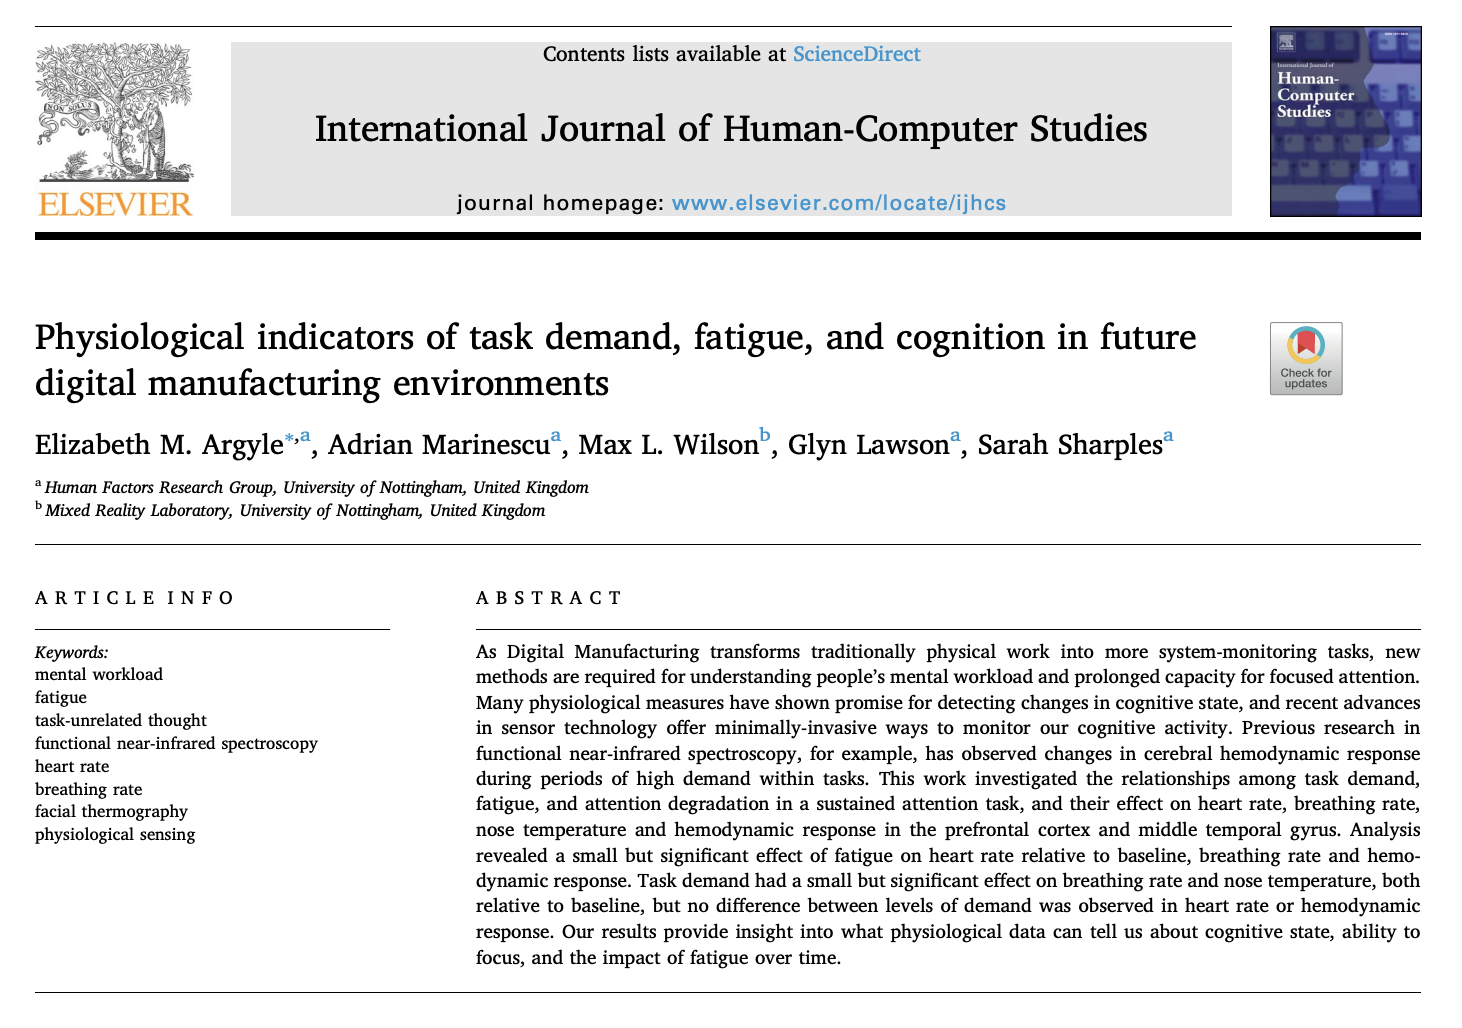 image of research paper entitled Physical indicators of task demand, fatigue, and cognition in future digital manufacturing environments.